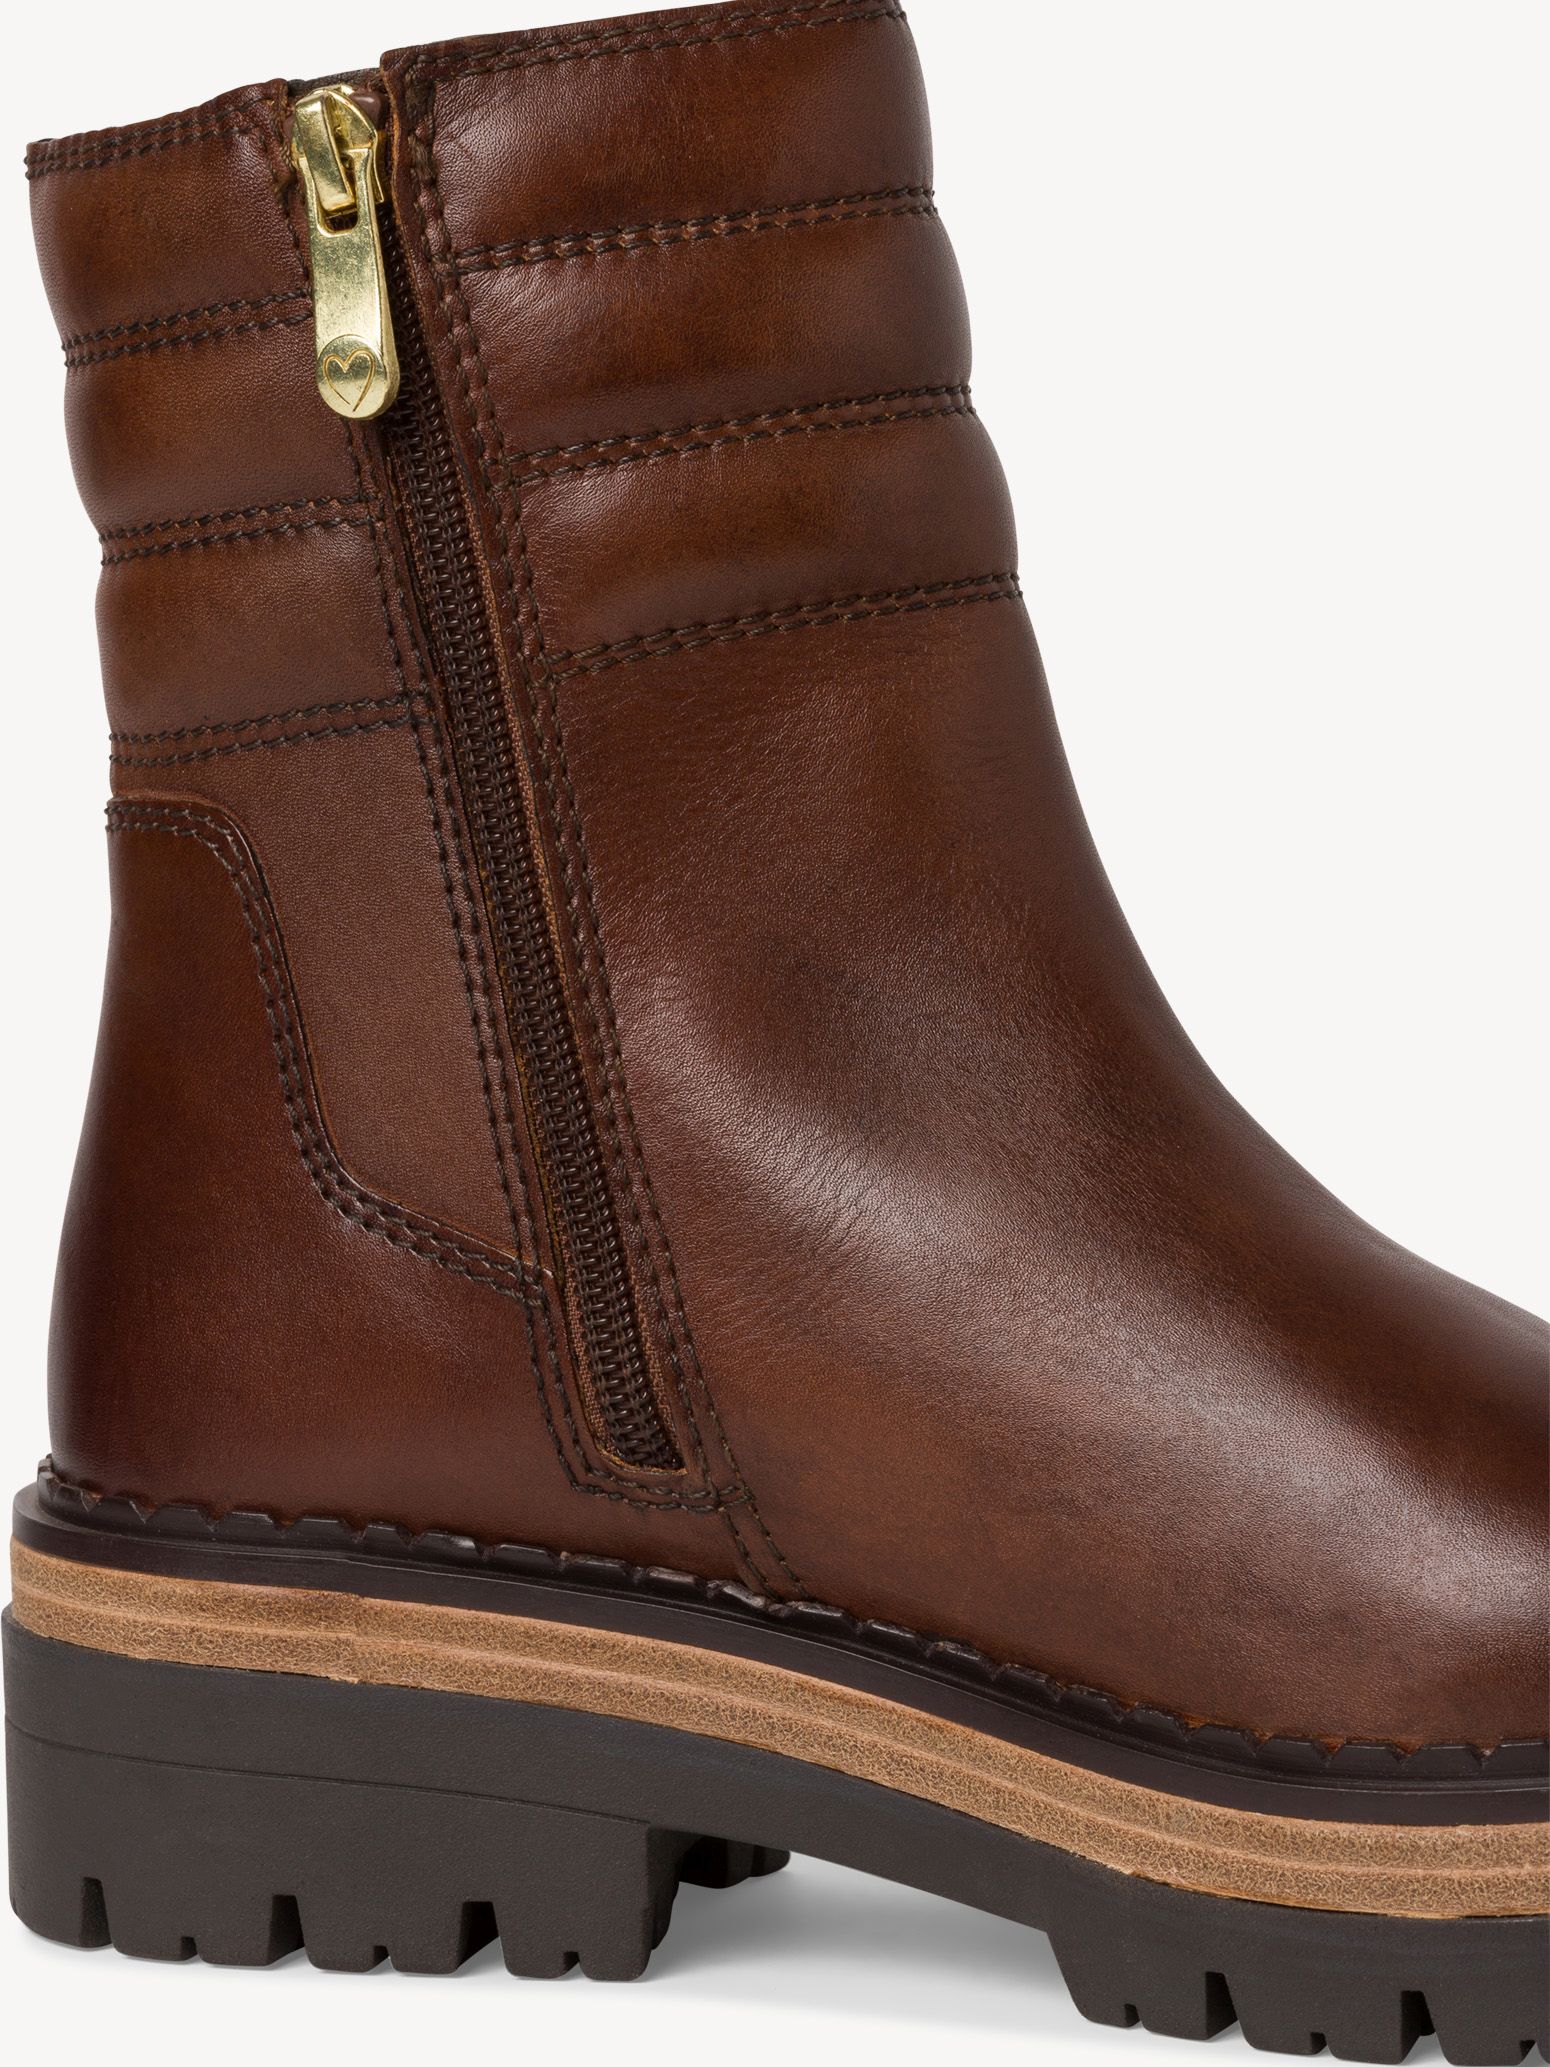 Leather Bootie - brown warm lining, CHESTNUT, hi-res